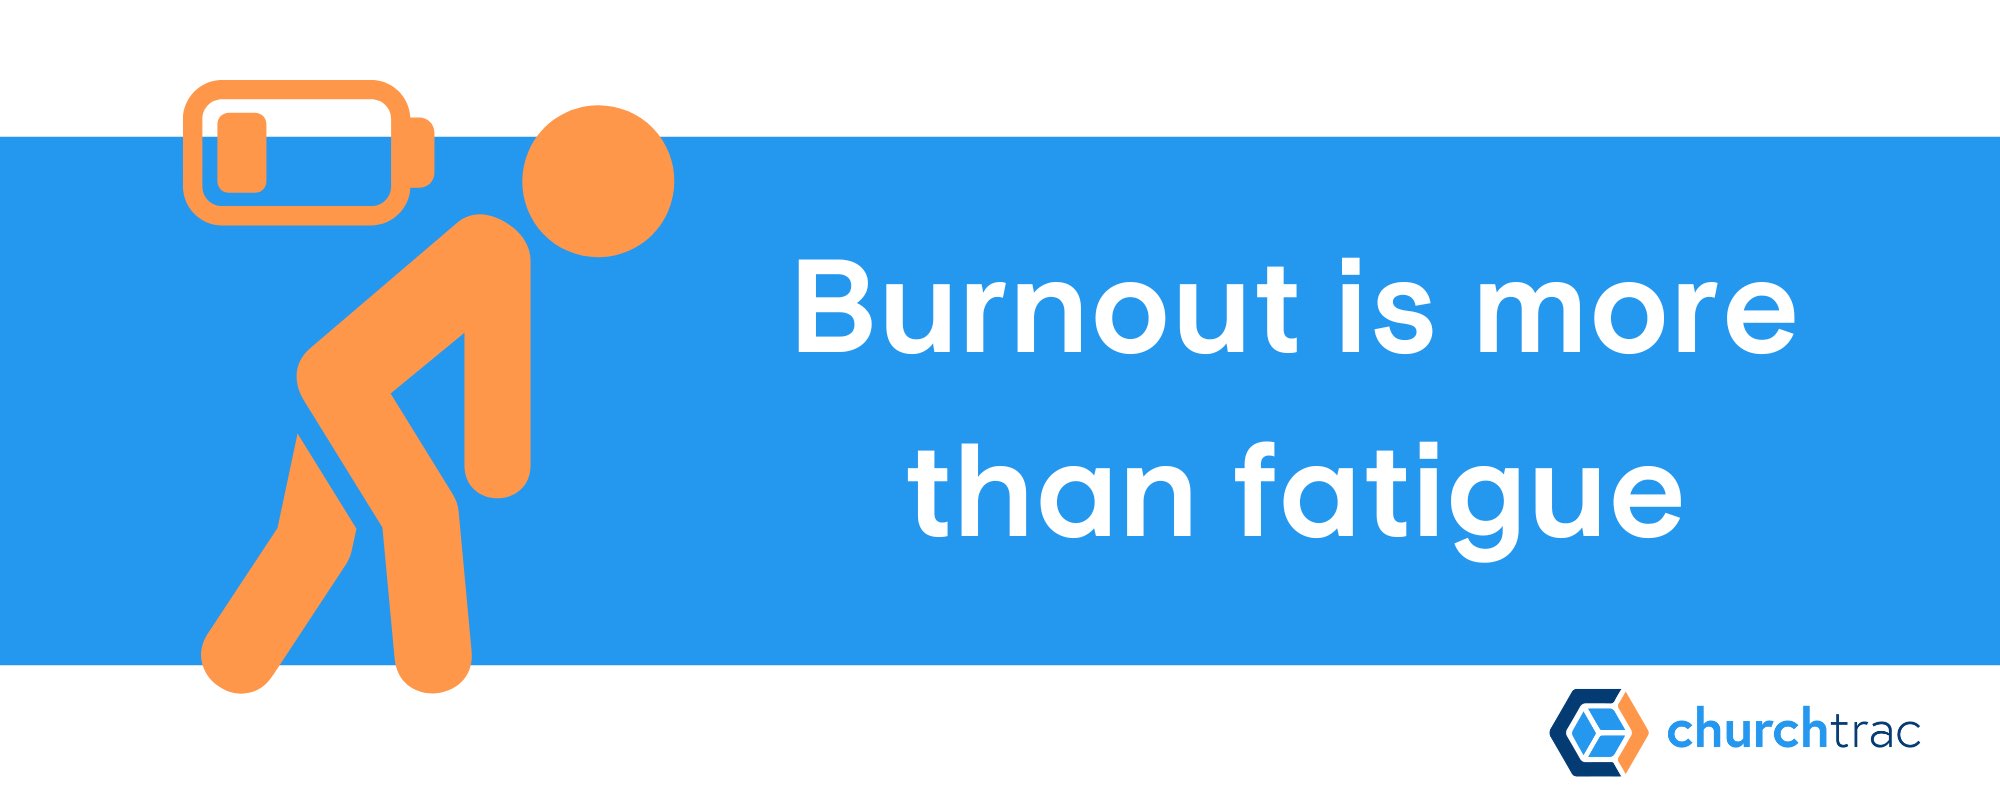 Church volunteer burnout is more than just fatigue